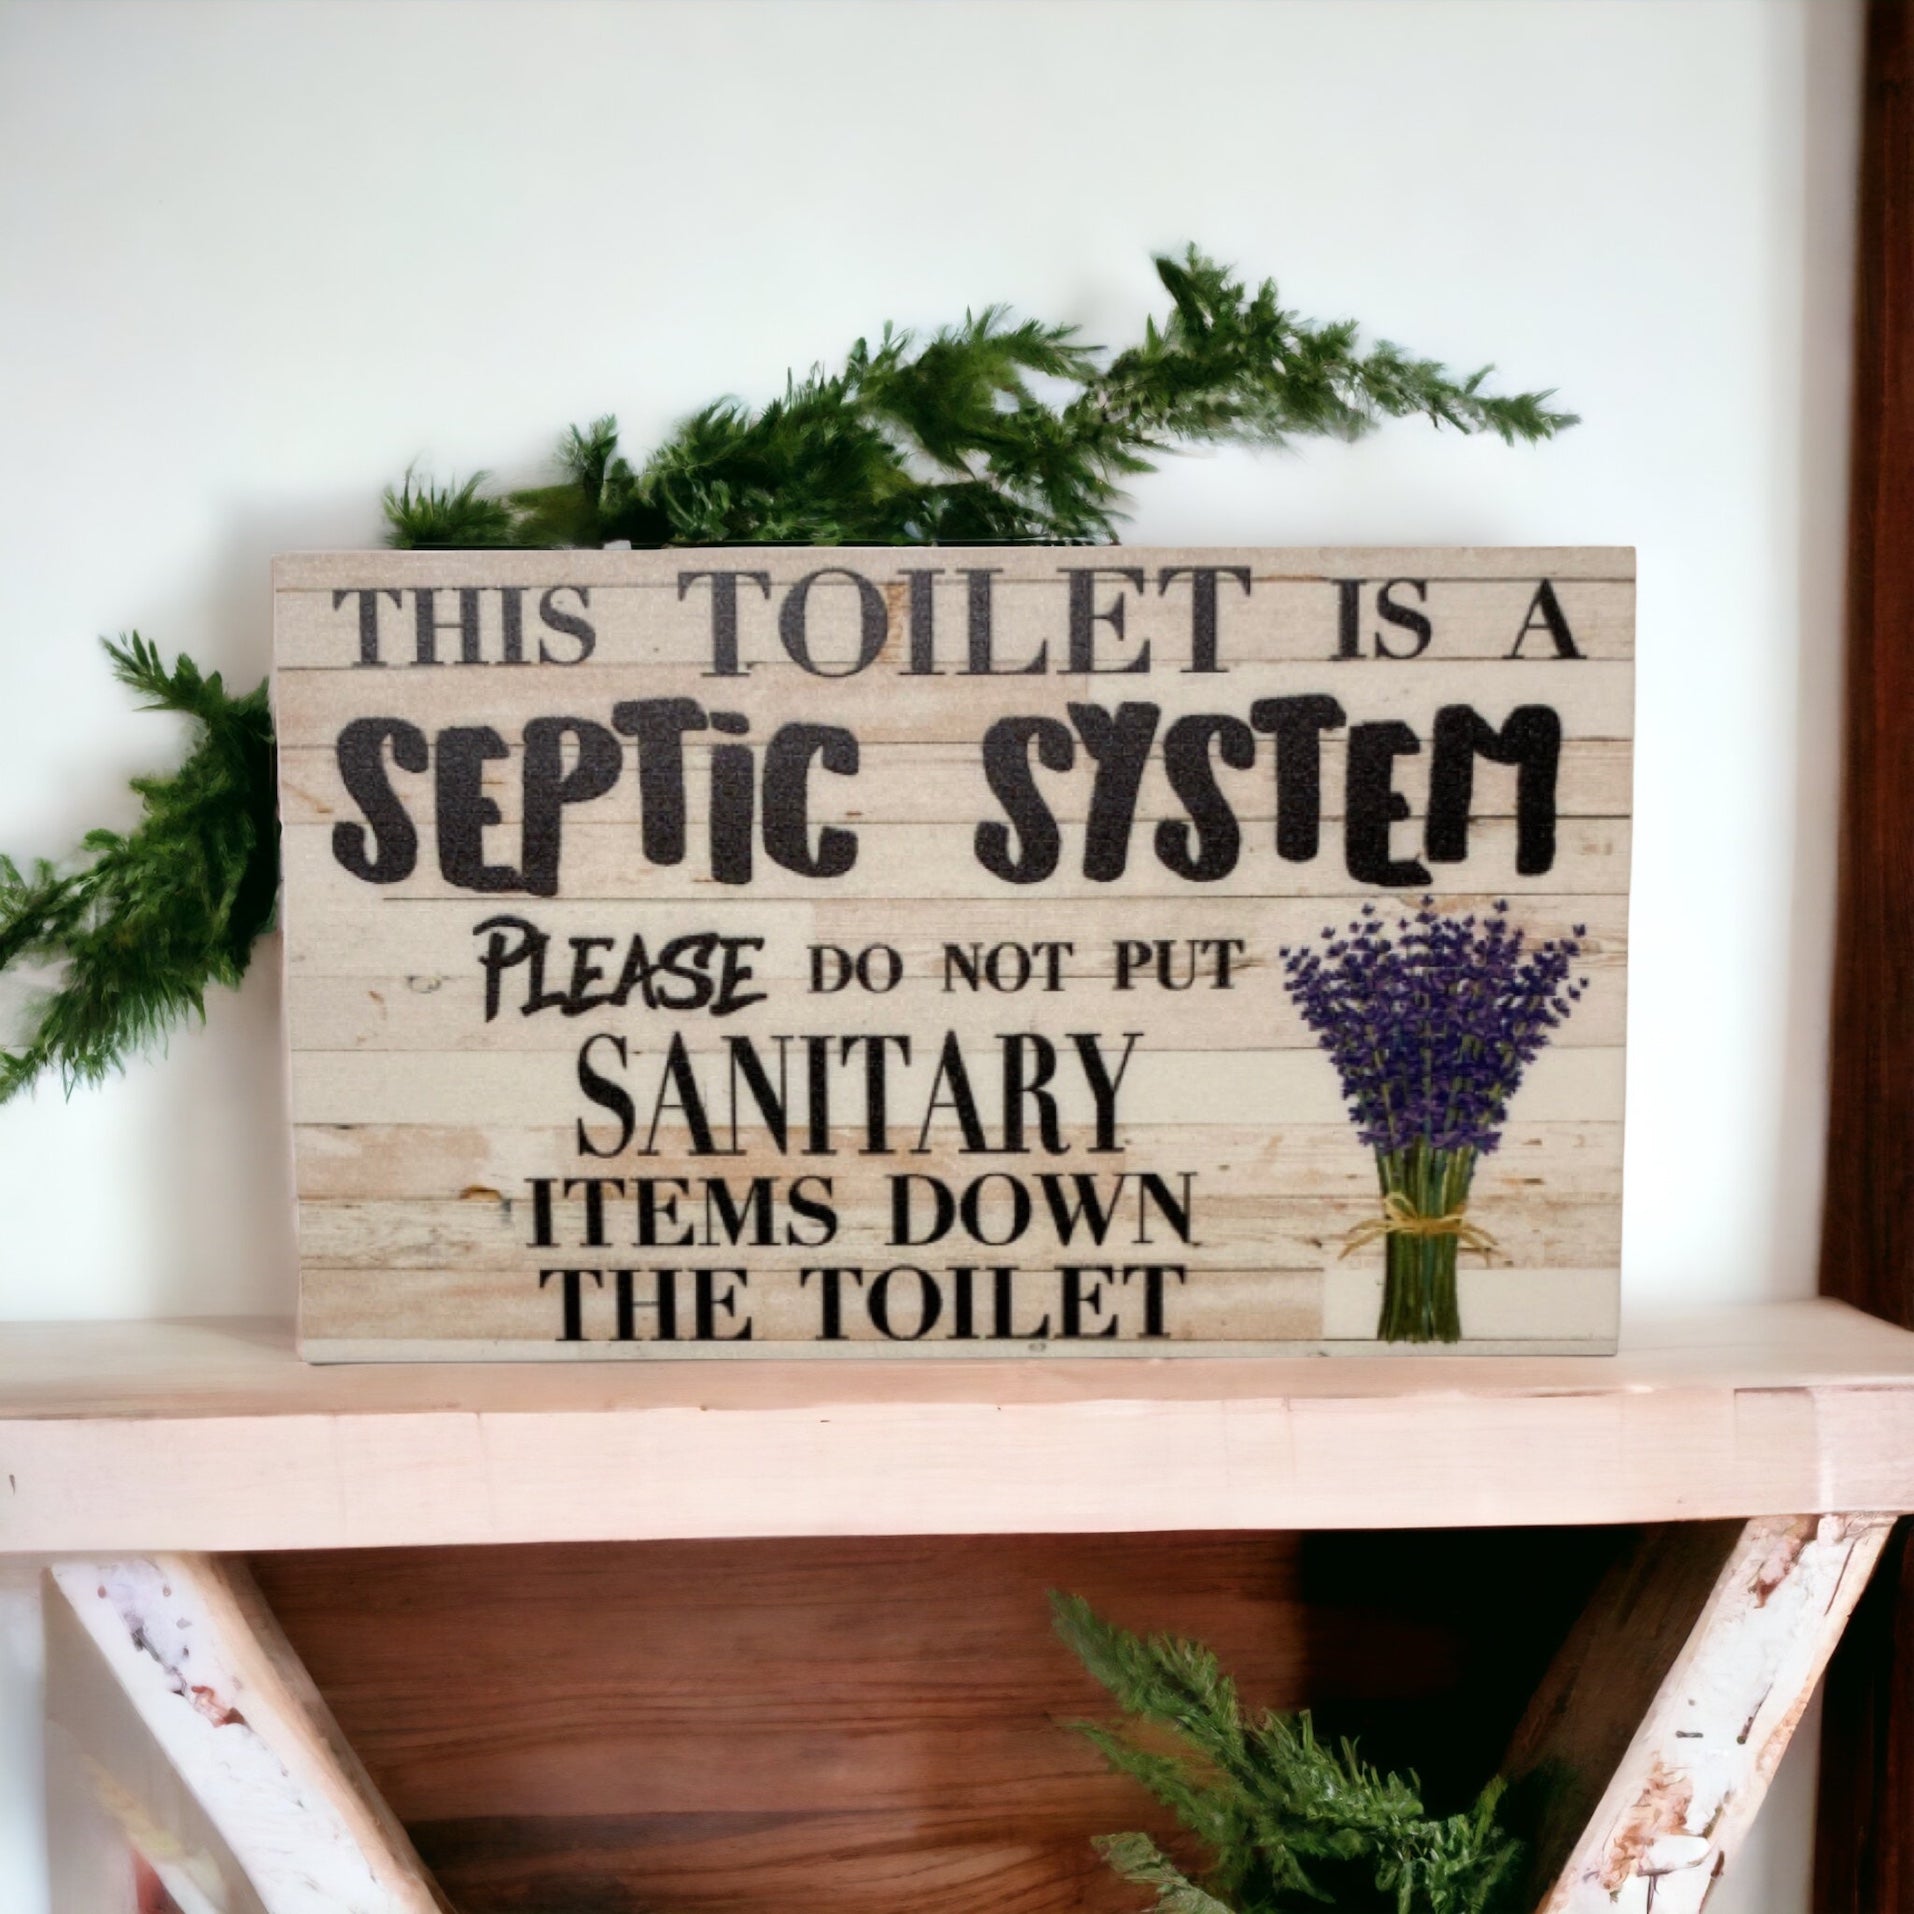 Toilet Septic System Bathroom Lavender Vintage Sign - The Renmy Store Homewares & Gifts 